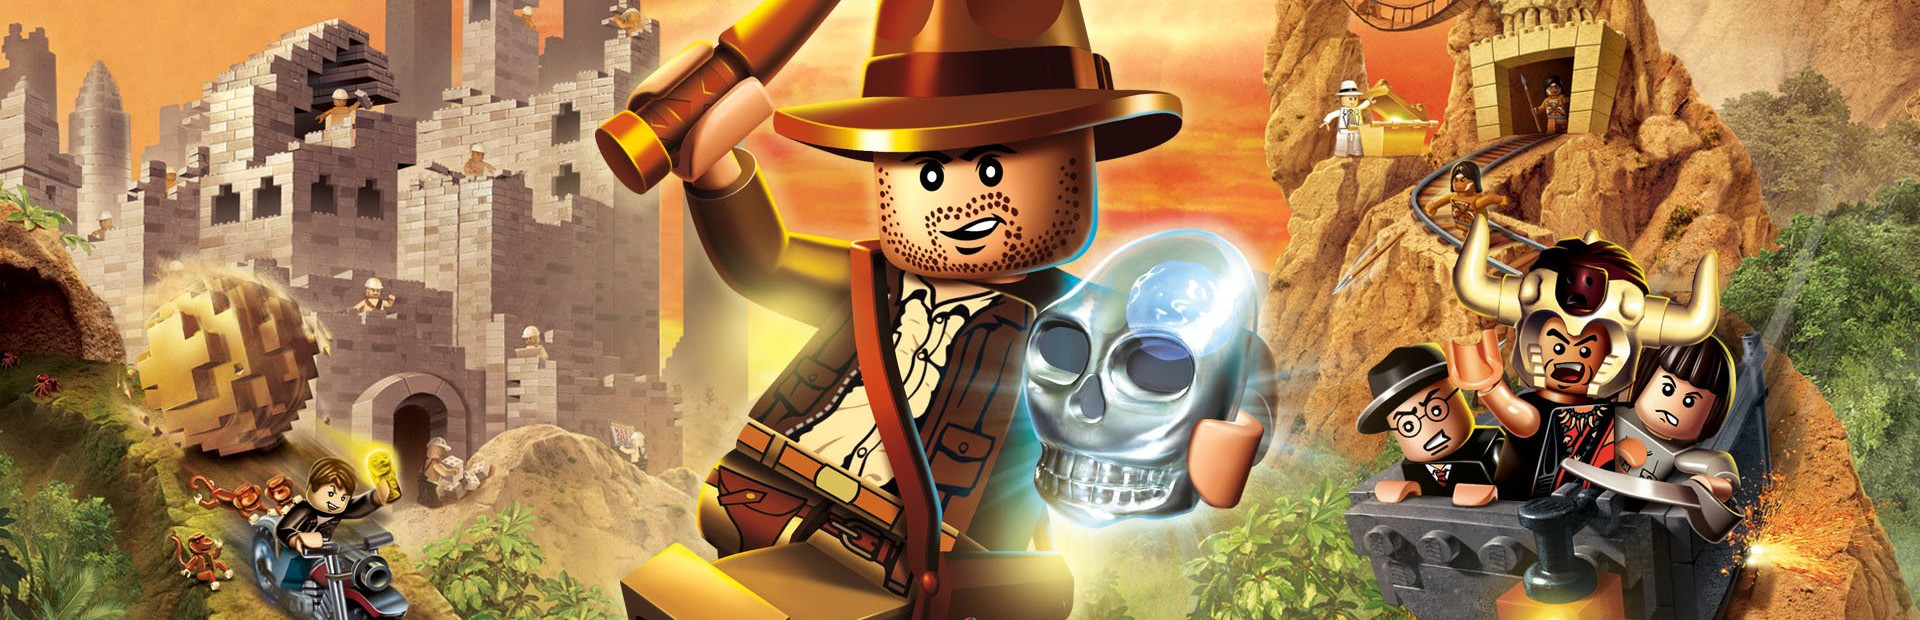 LEGO® Indiana Jones™ 2: The Adventure Continues cover image